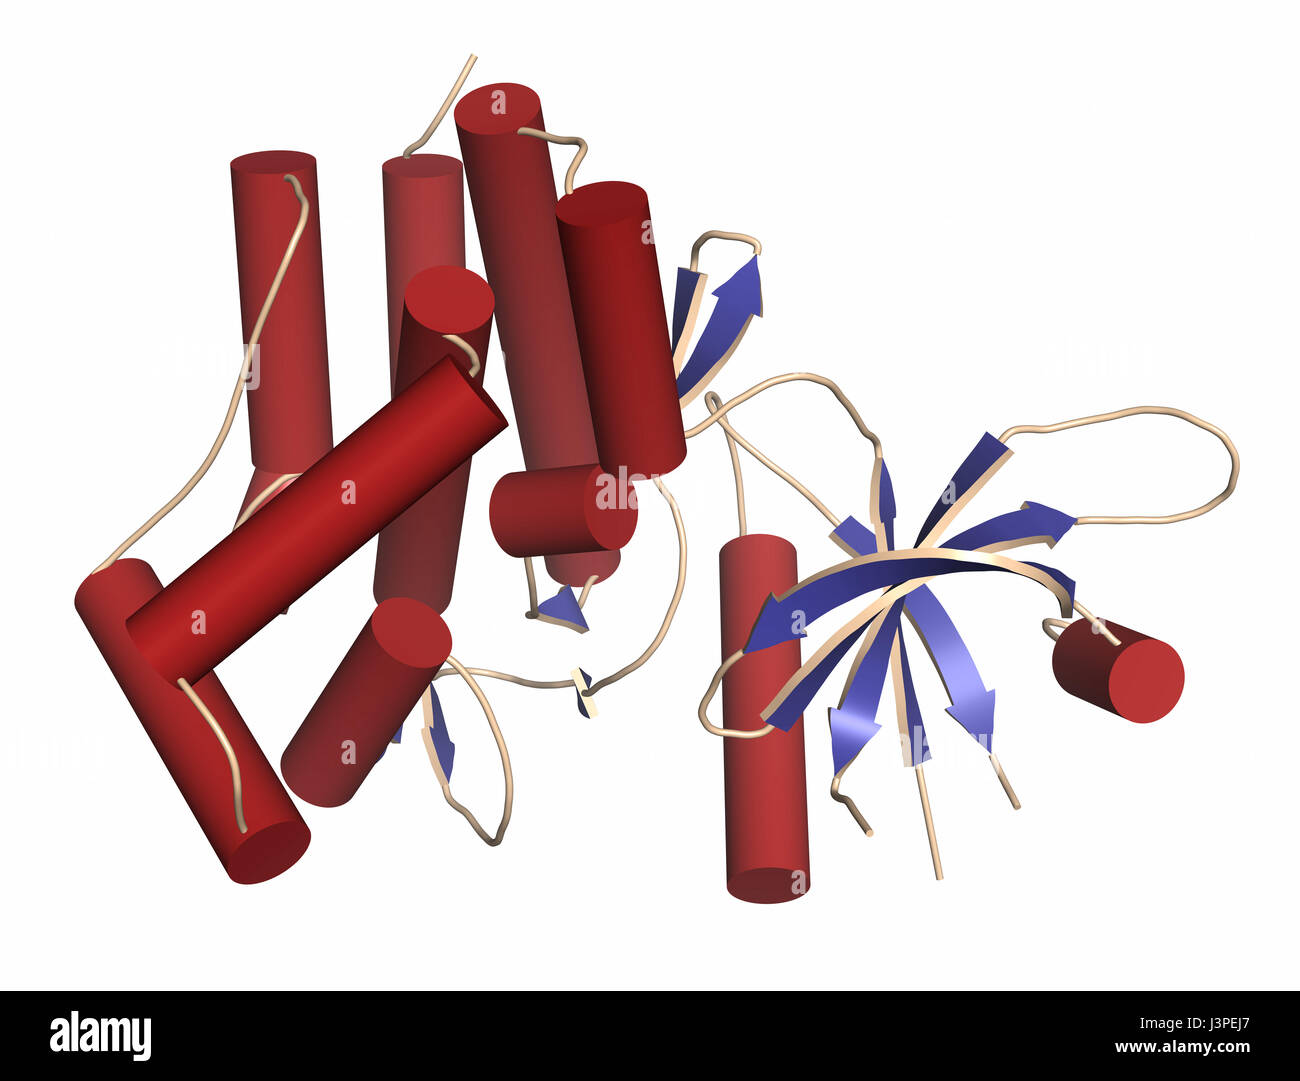 Janus kinase 1 protein. Part of JAK-STAT signalling pathway and drug target. Cartoon representation. Secondary structure coloring. Stock Photo